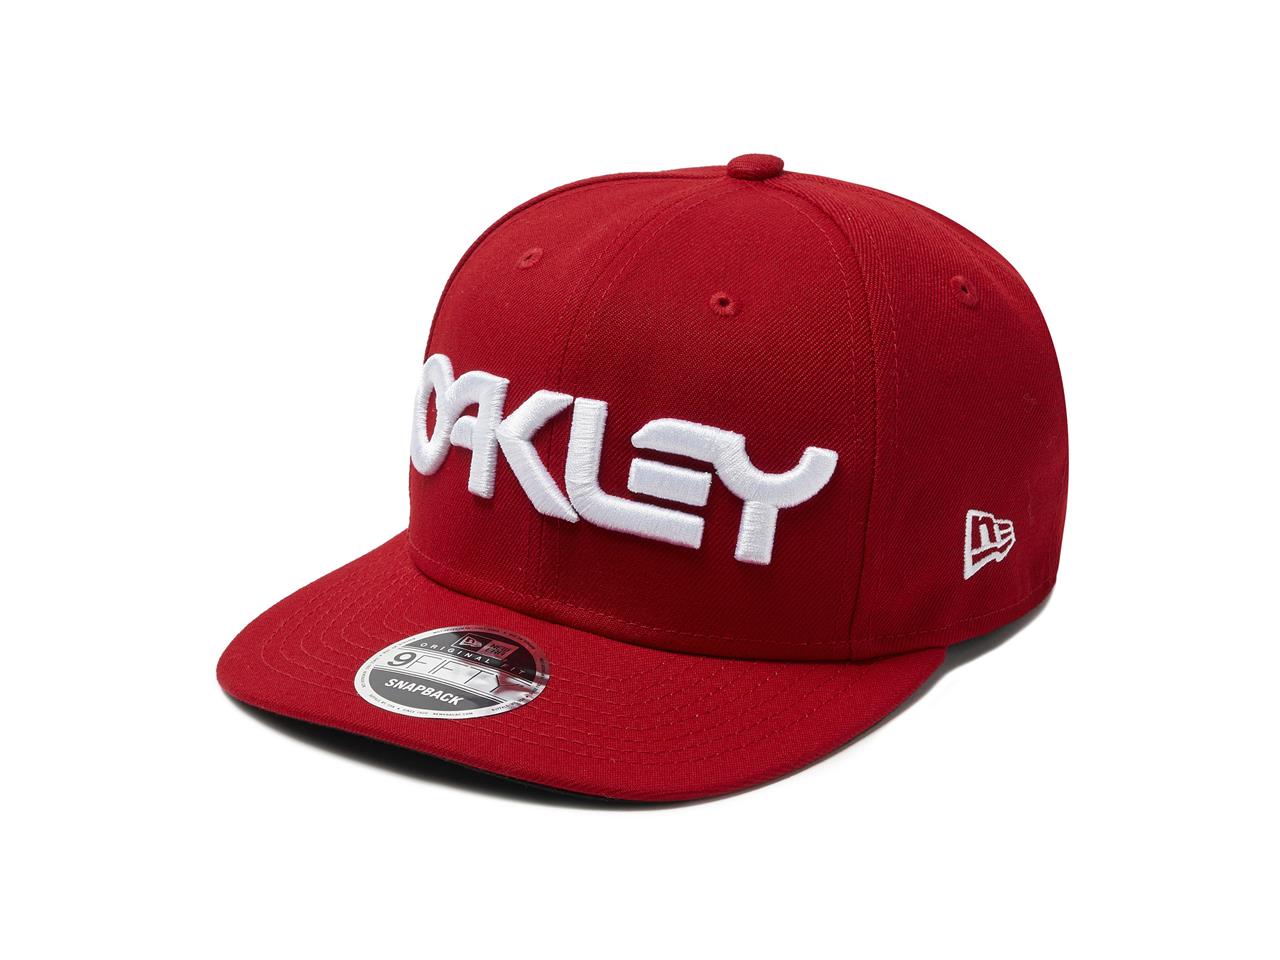 CASQUETTE MARK II NOVELTY SNAP BACK IRON RED